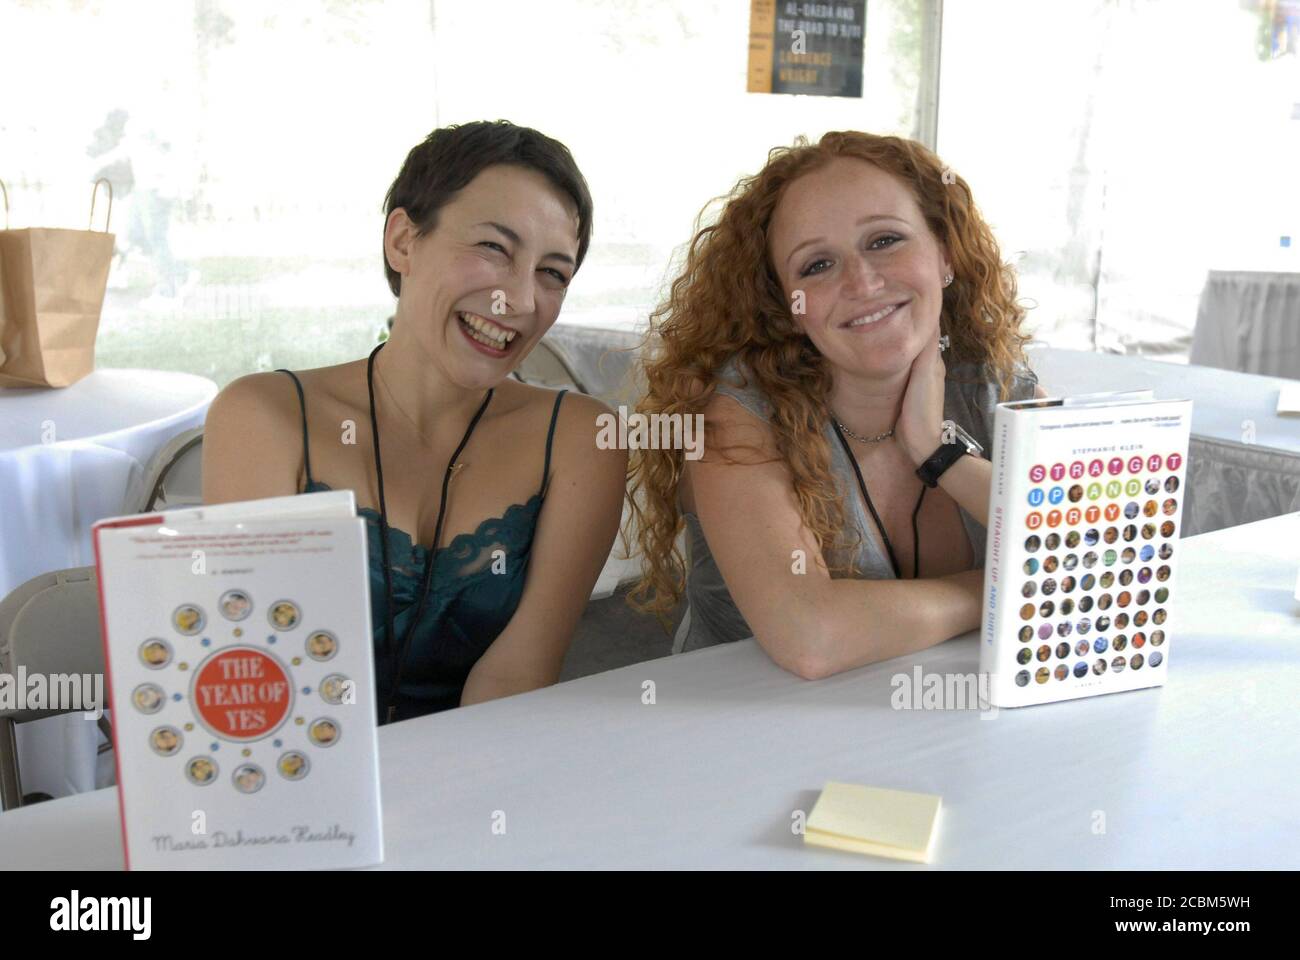 Austin, TX October 29, 2006:  Maria Dahvana Headley (l), author of 'The Year of Yes' about her dating experiences, and Stephanie Klein, popular blogger and author of 'Straight Up and Dirty,' share a laugh while signing their books at the Texas Book Festival. ©Bob Daemmrich Stock Photo